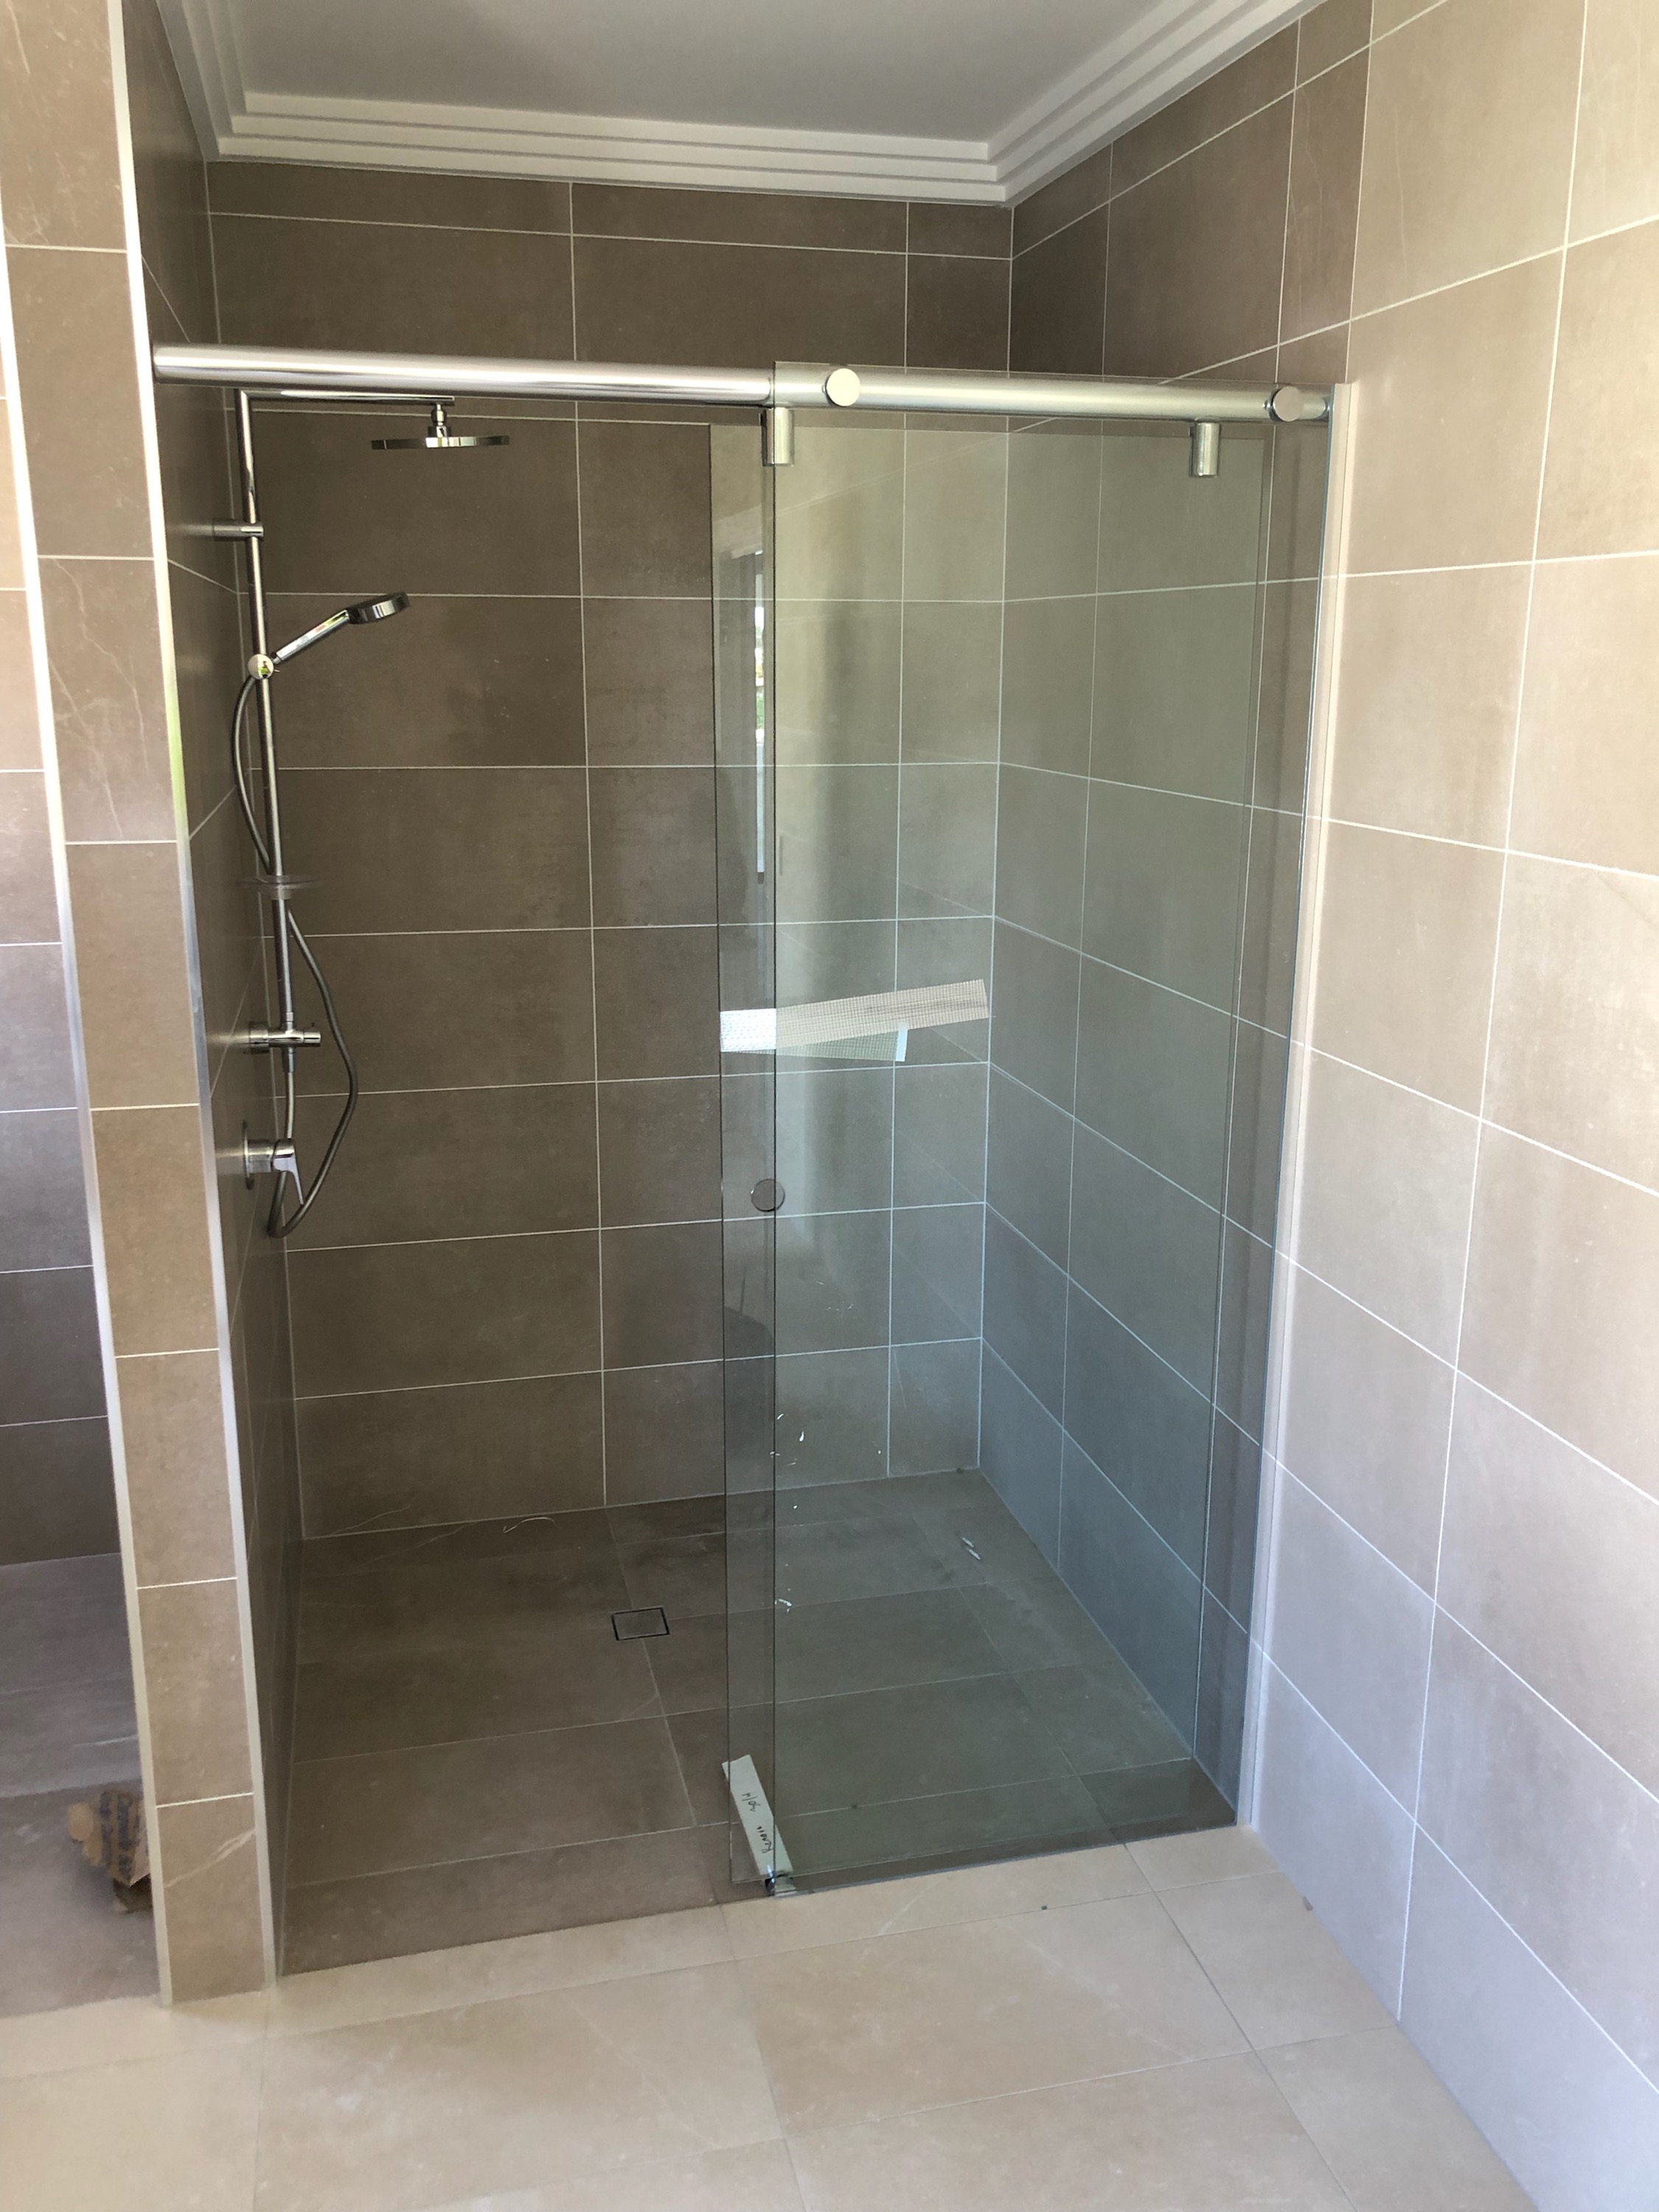 Frameless Sliding Shower Screen in a bathroom beeing constructed